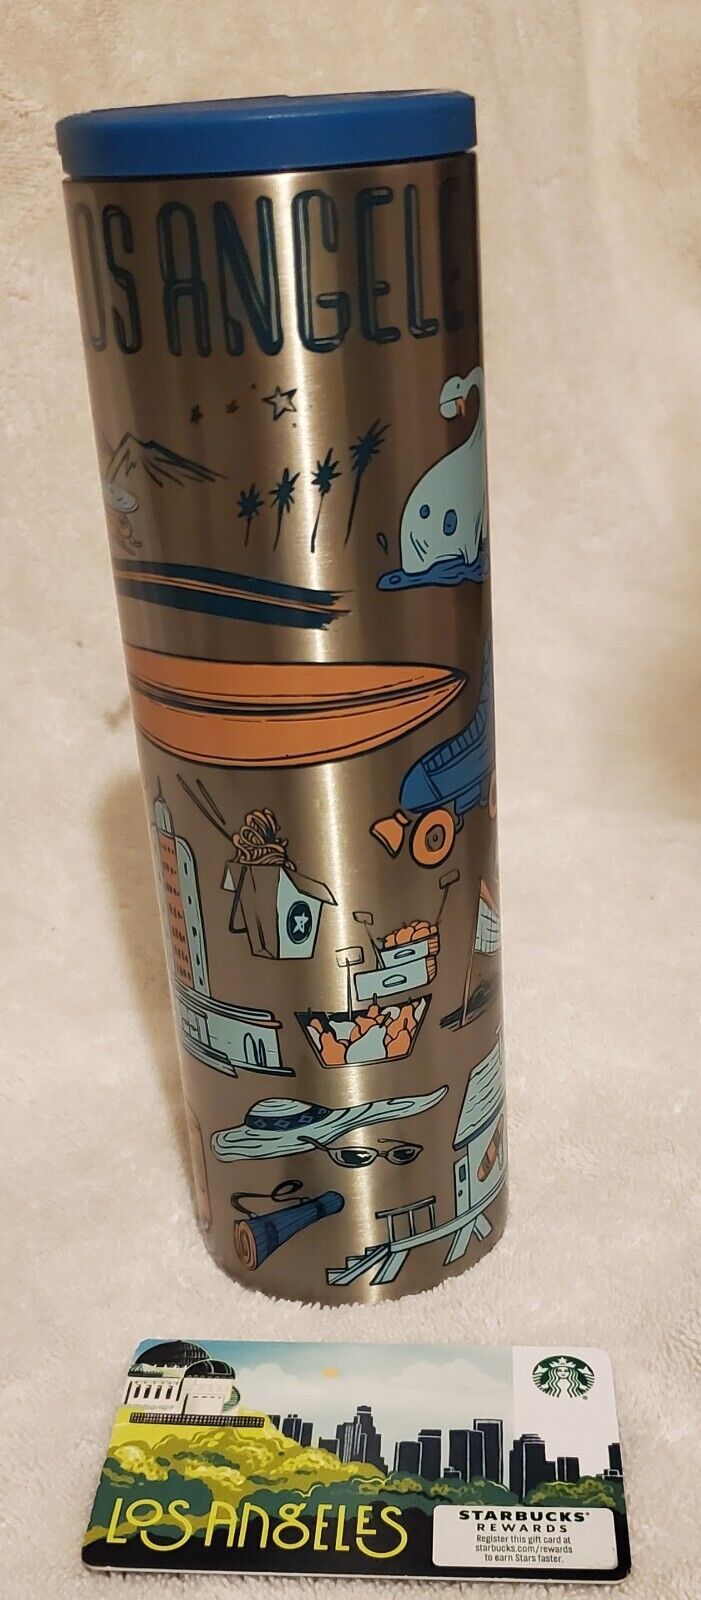 2019 Starbucks Stainless Steel Tumbler Los Angeles been There Series 16 oz NEW